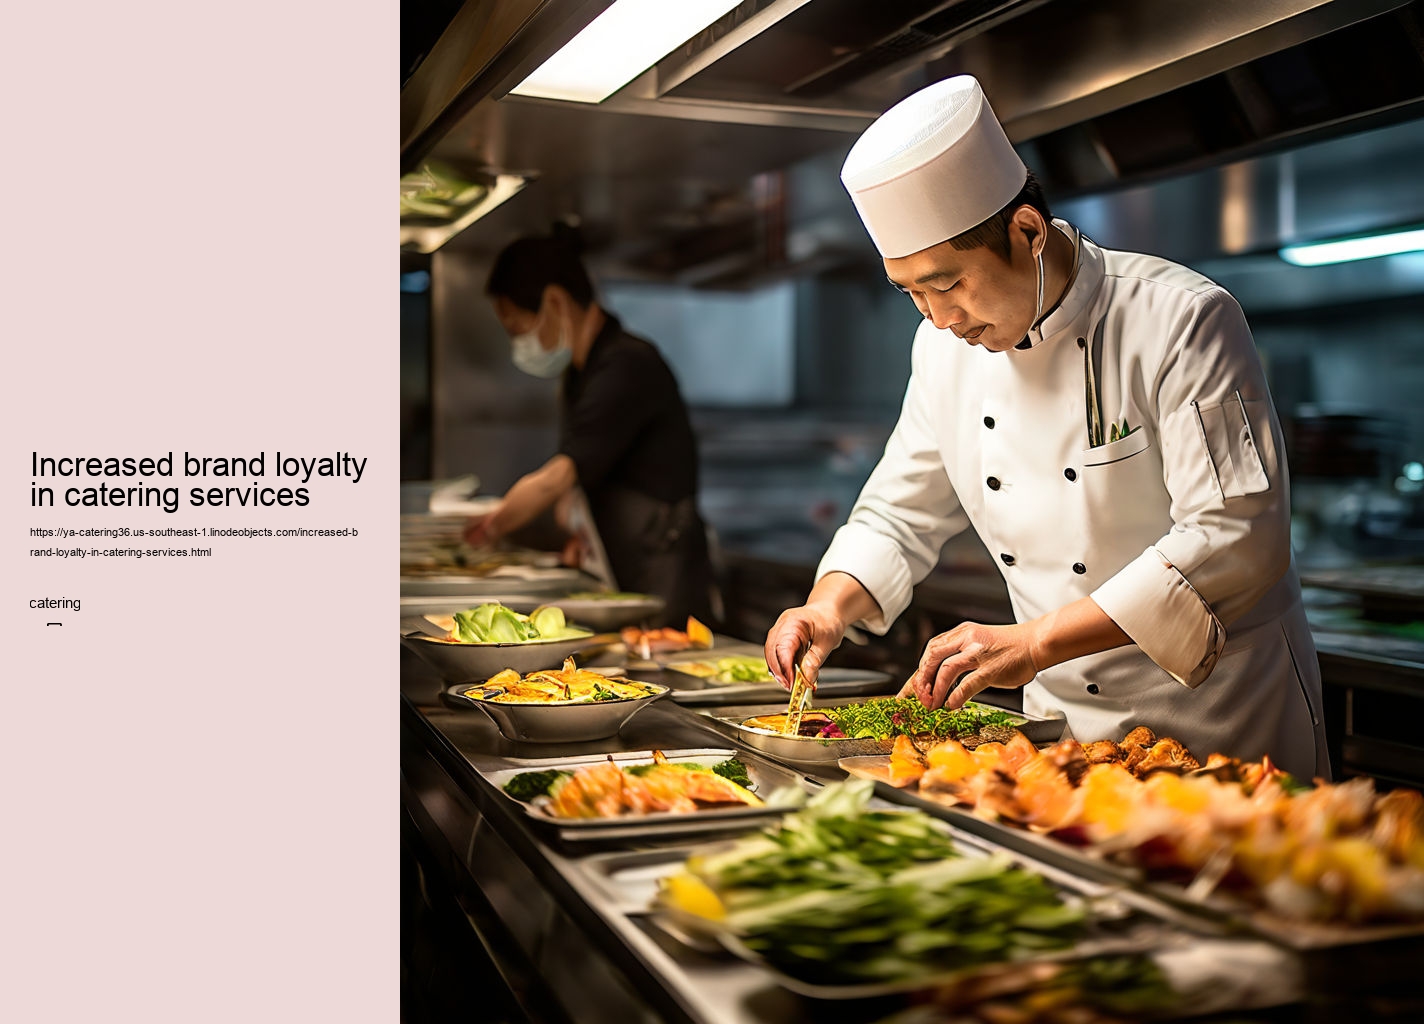 Increased brand loyalty in catering services